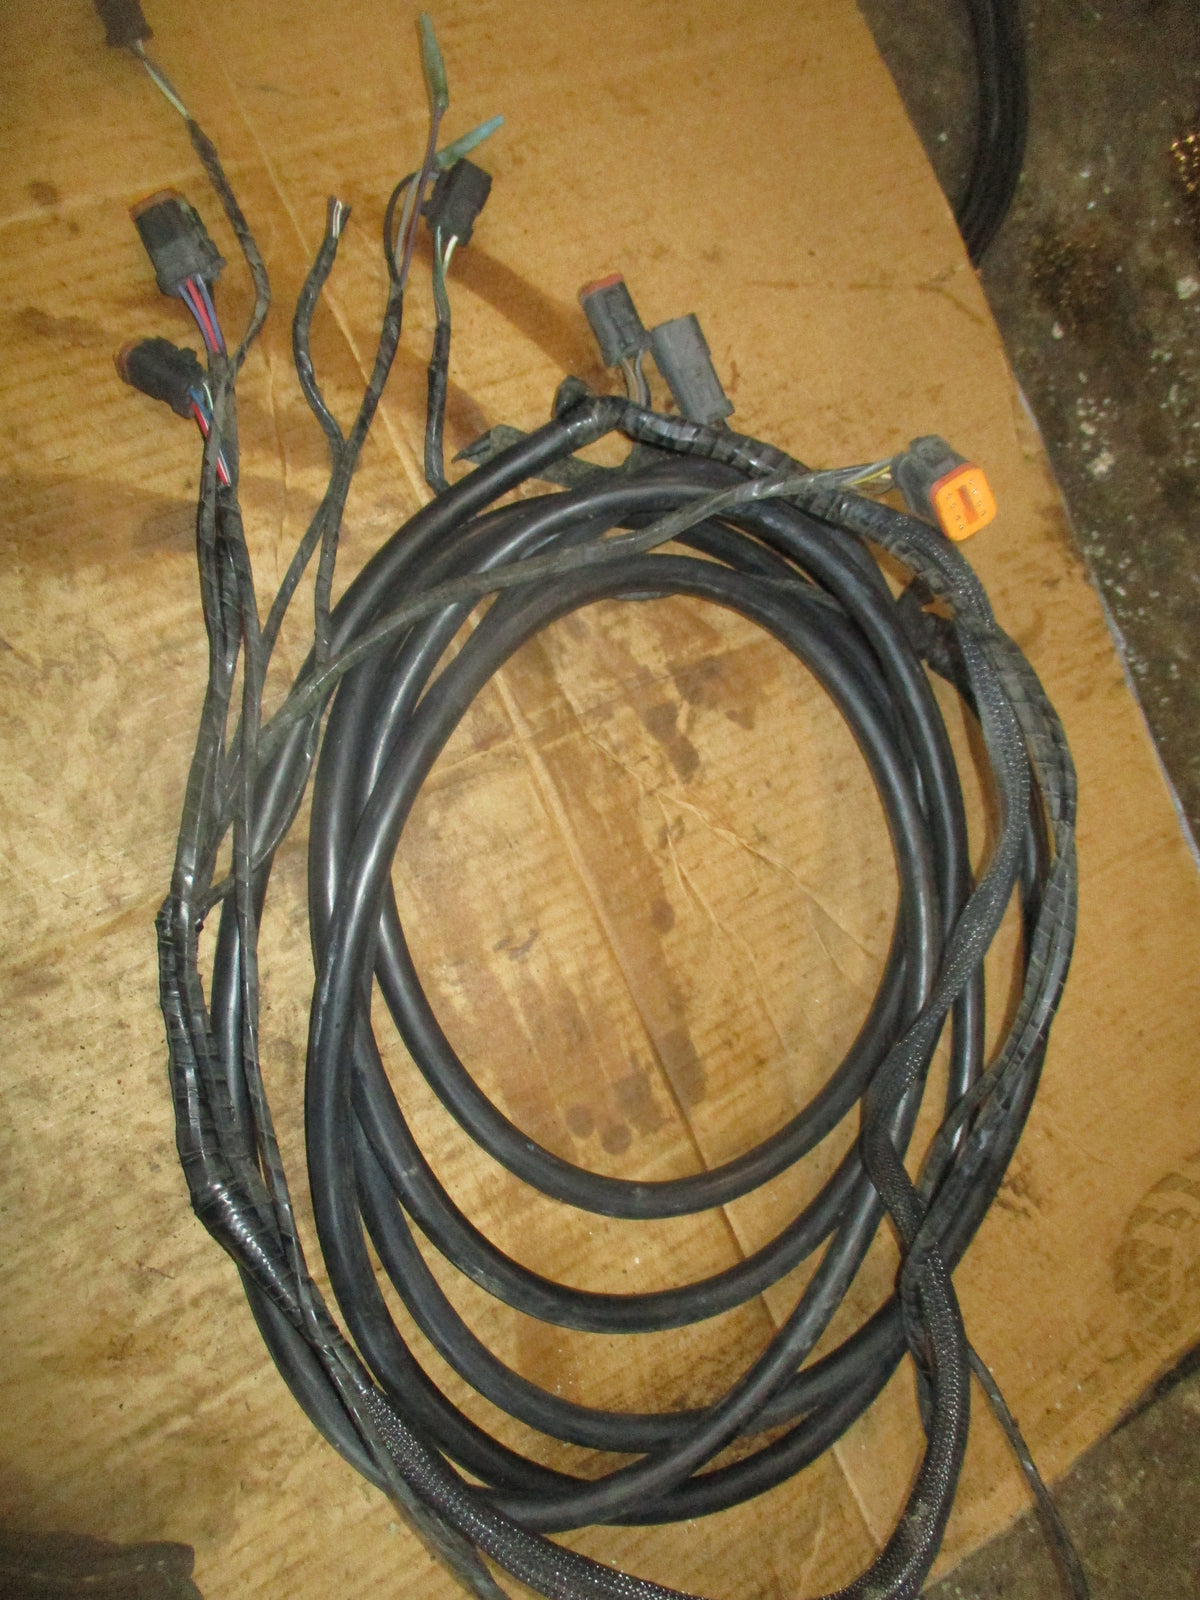 Johnson/ Evinrude outboard 15" BRP rigging harness wiring